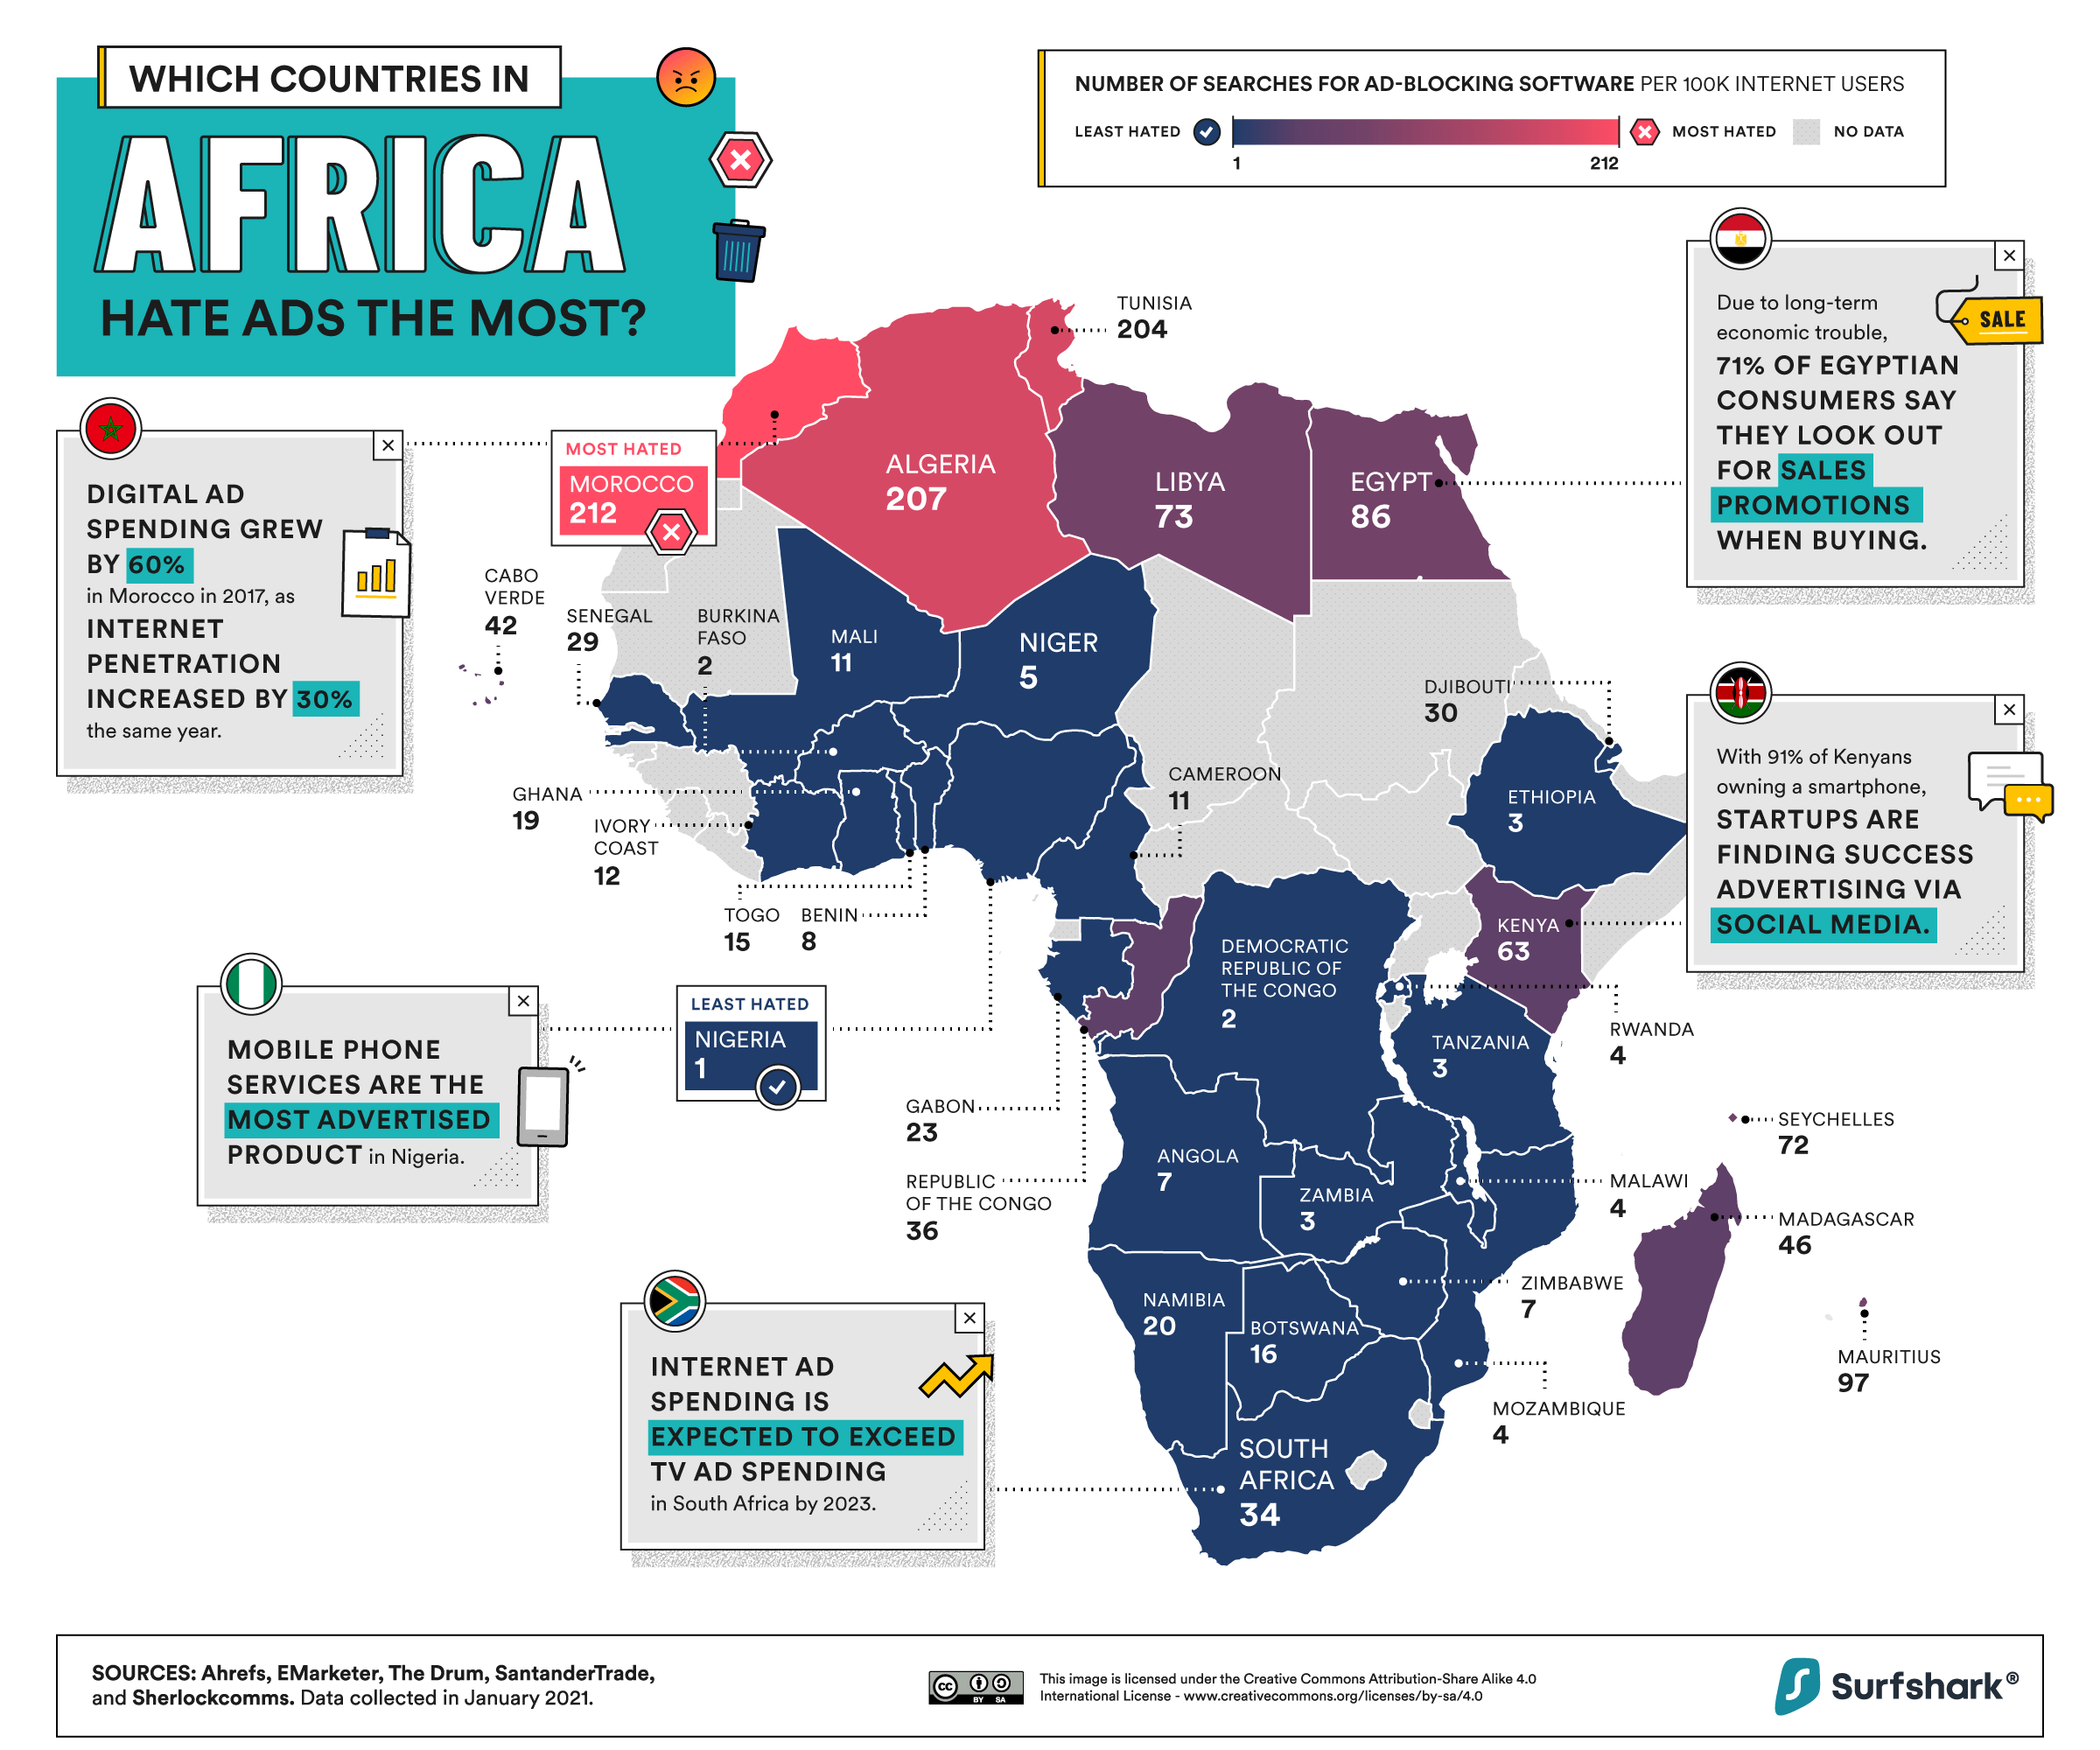 a map showing which countries in Africa made the most Google searches for ad blocking software